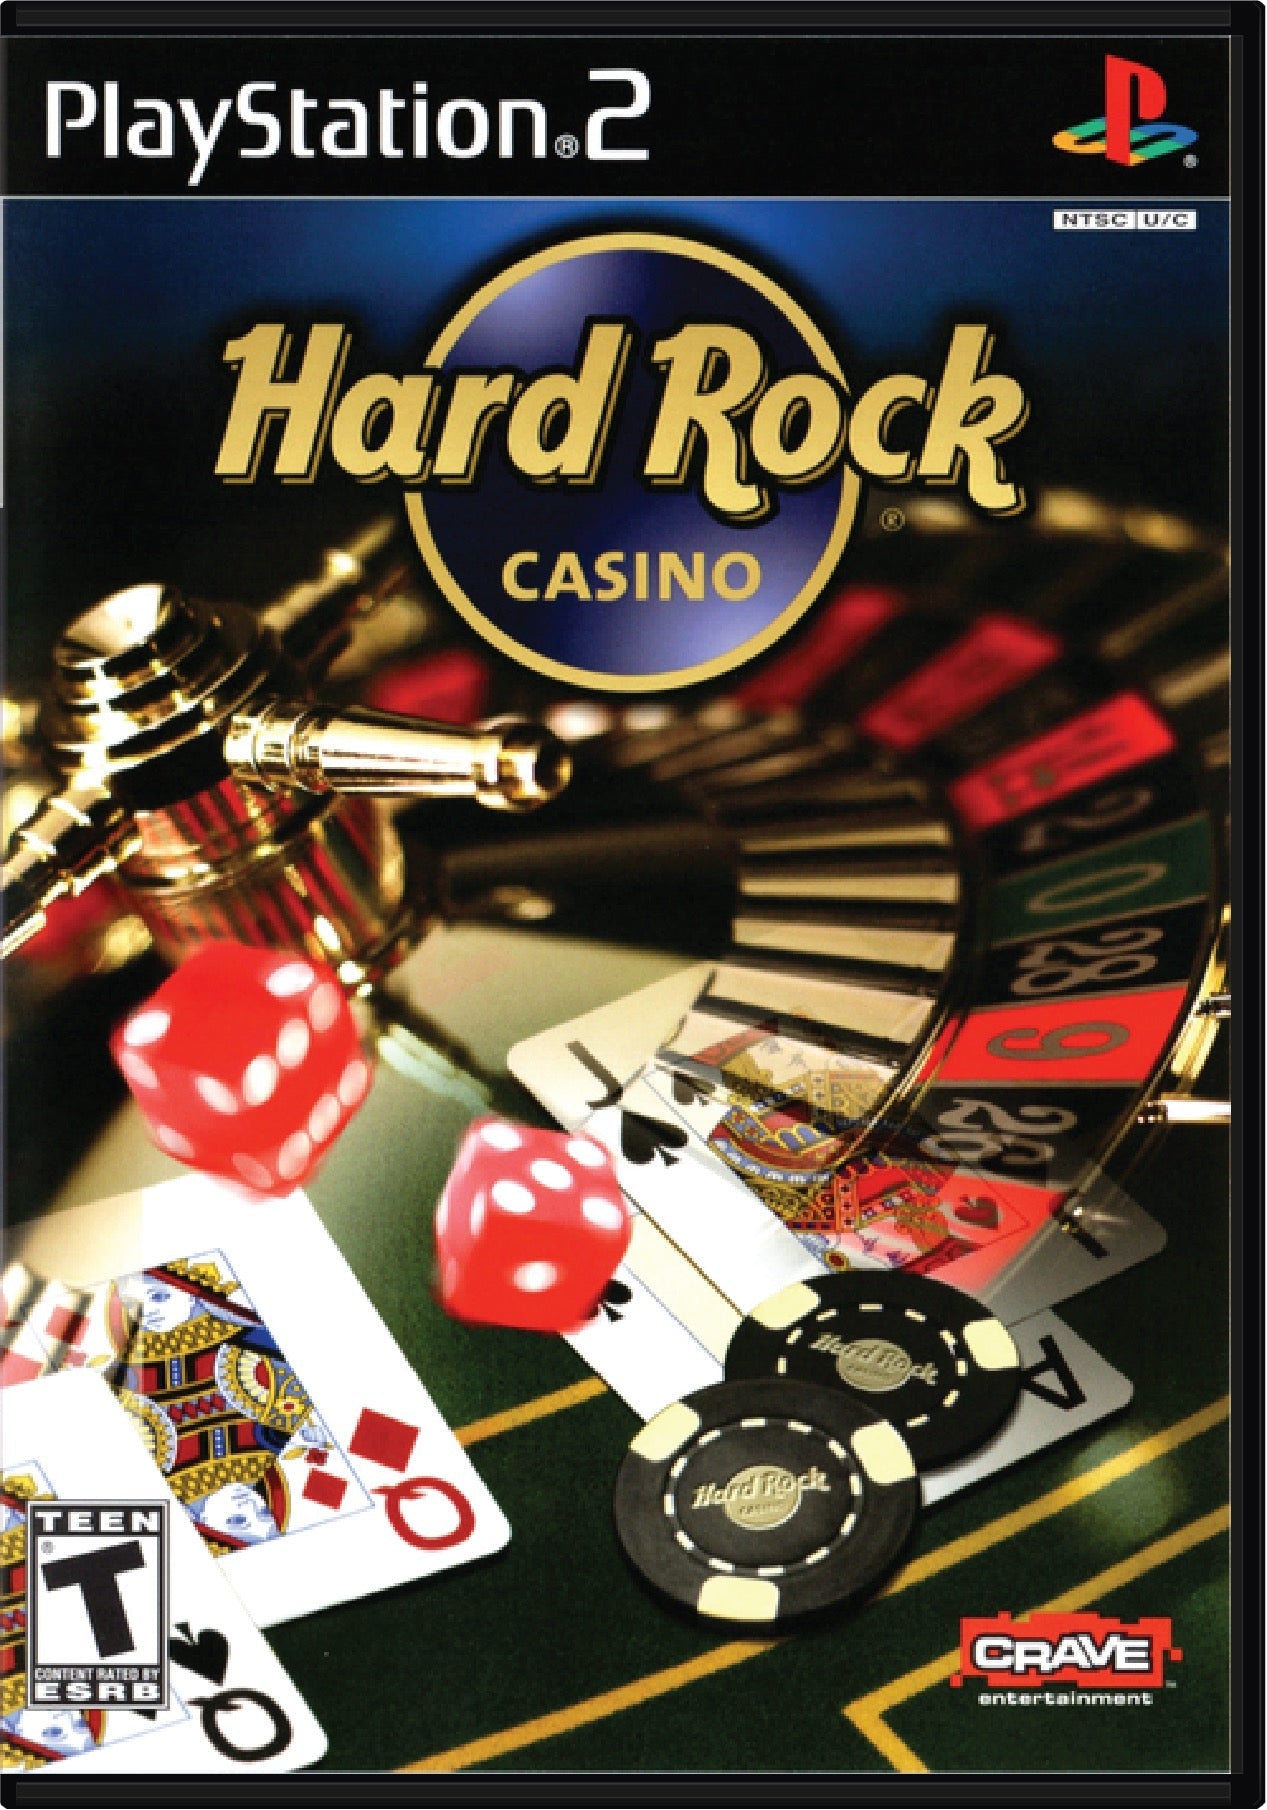 Hard Rock Casino Cover Art and Product Photo